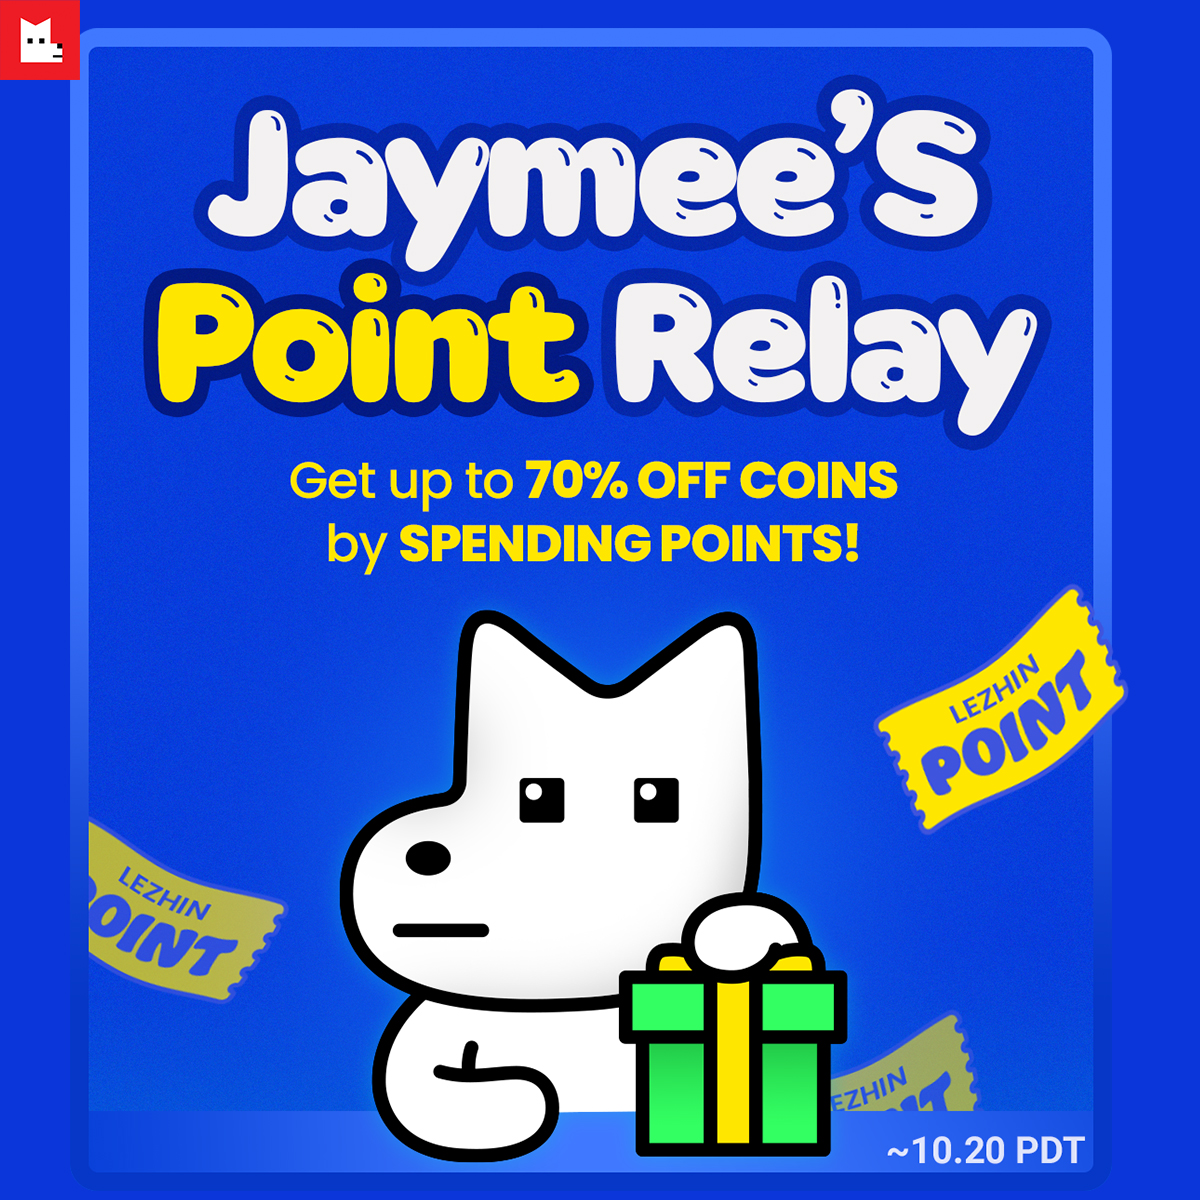 Guess what?🤭 JAYMEE’S 🏷️Coin Event🏷️ is back for a limited time!⏰ Get 𝟳𝟬% 𝗼𝗳𝗳 Coins by using your points! ➡️ bit.ly/tw_coinevent Enjoy this chance while it lasts! 10/19~10/20 (PDT) #coinevent #lezhincomics #coinsale #only2days #pointrelay